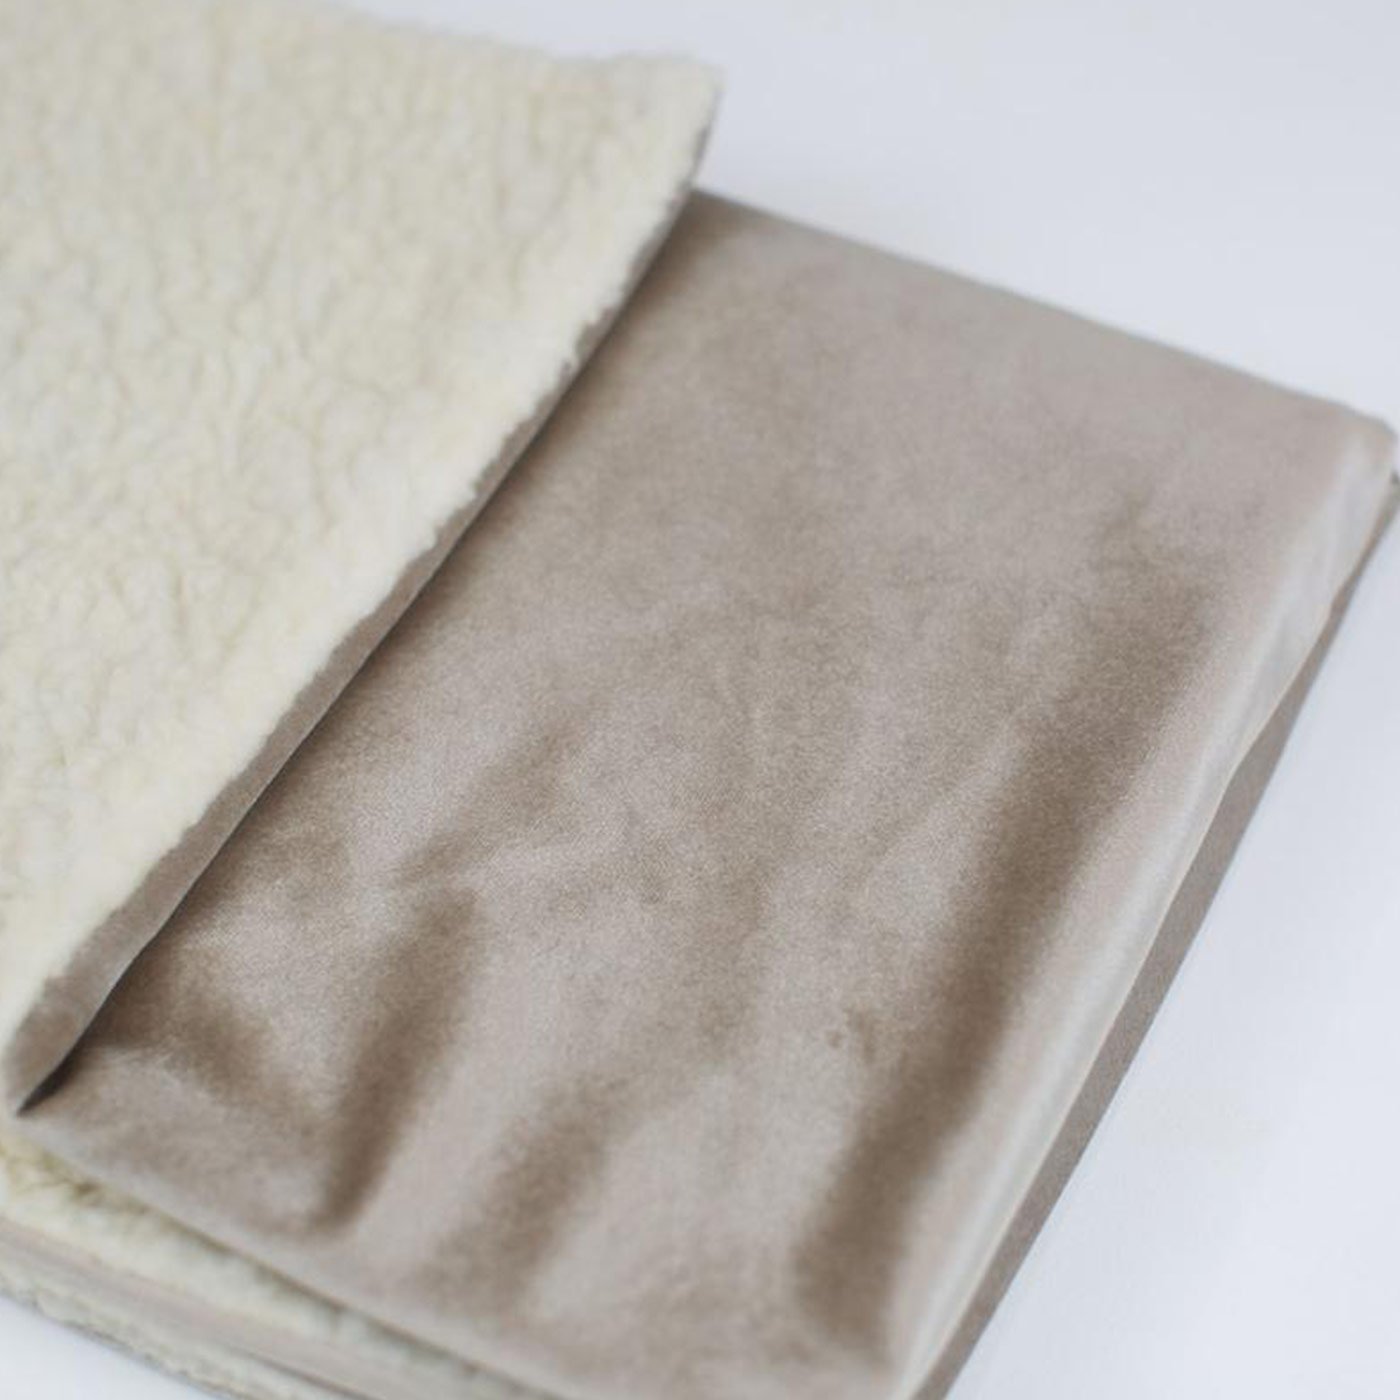 [color:mushroom velvet] Super Soft Sherpa & Teddy Fleece Lining, Our Luxury Cat & Kitten Blanket In Stunning Mushroom Velvet I The Perfect Cat Bed Accessory! Available Now at Lords & Labradors US